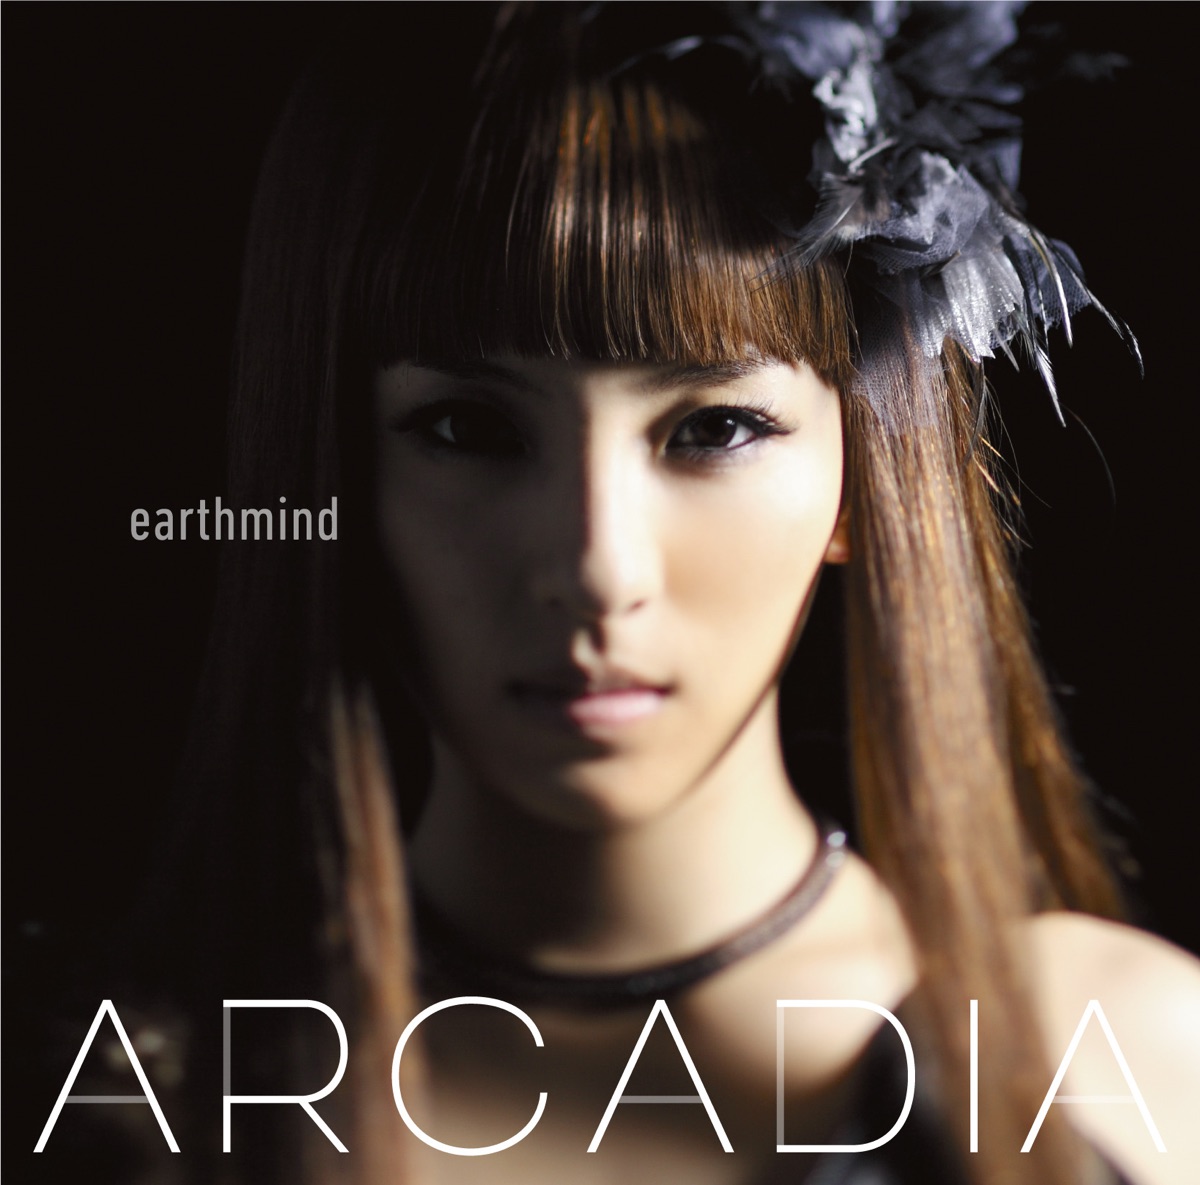 Cover art for『earthmind - Another Heaven』from the release『ARCADIA』